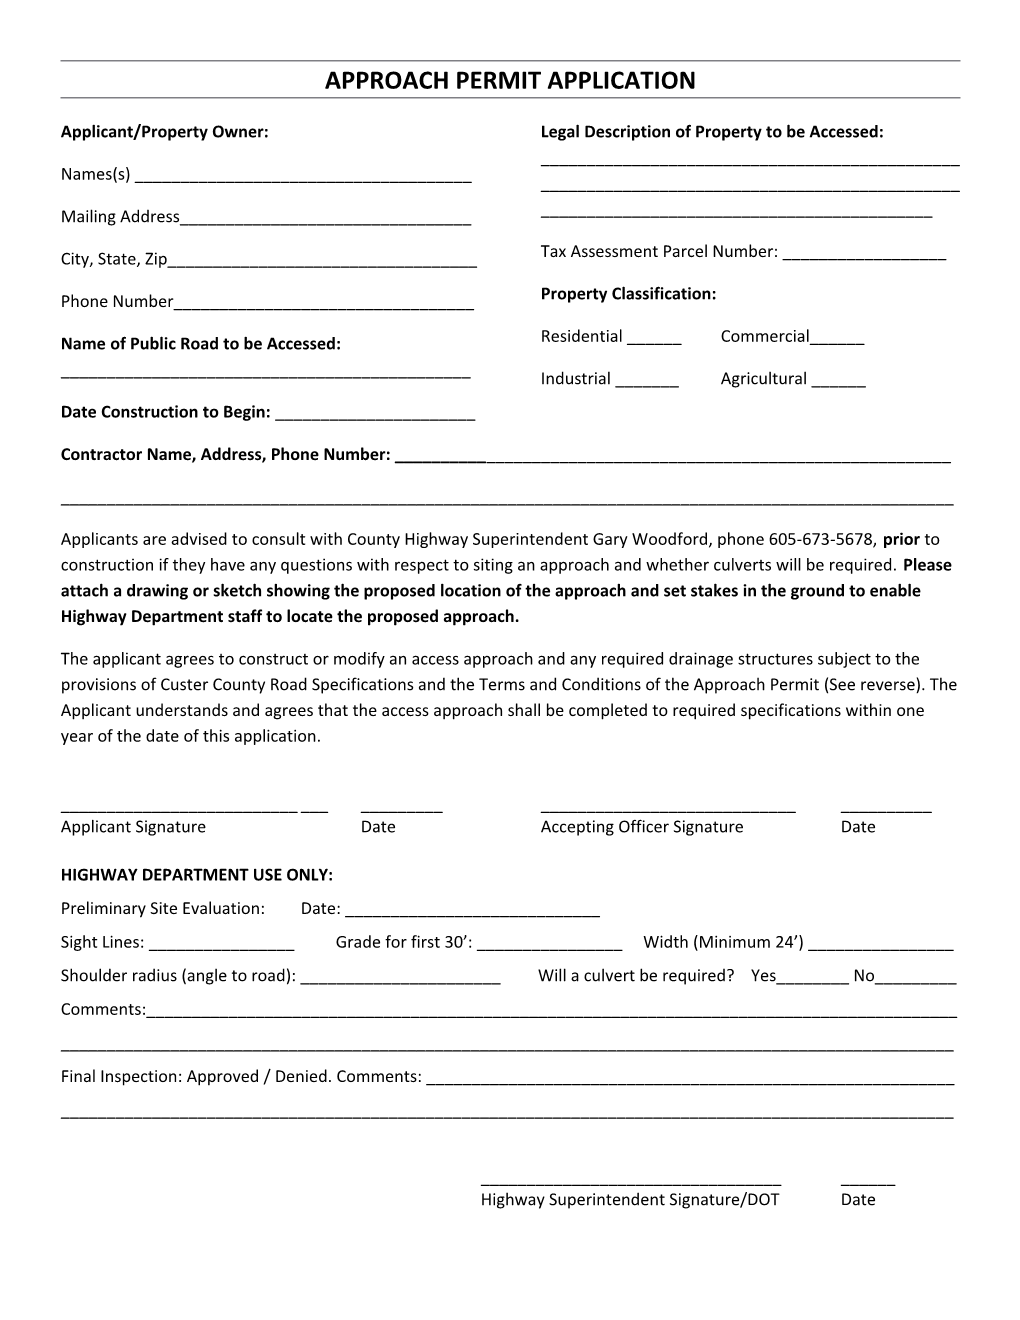 Approach Permit Application